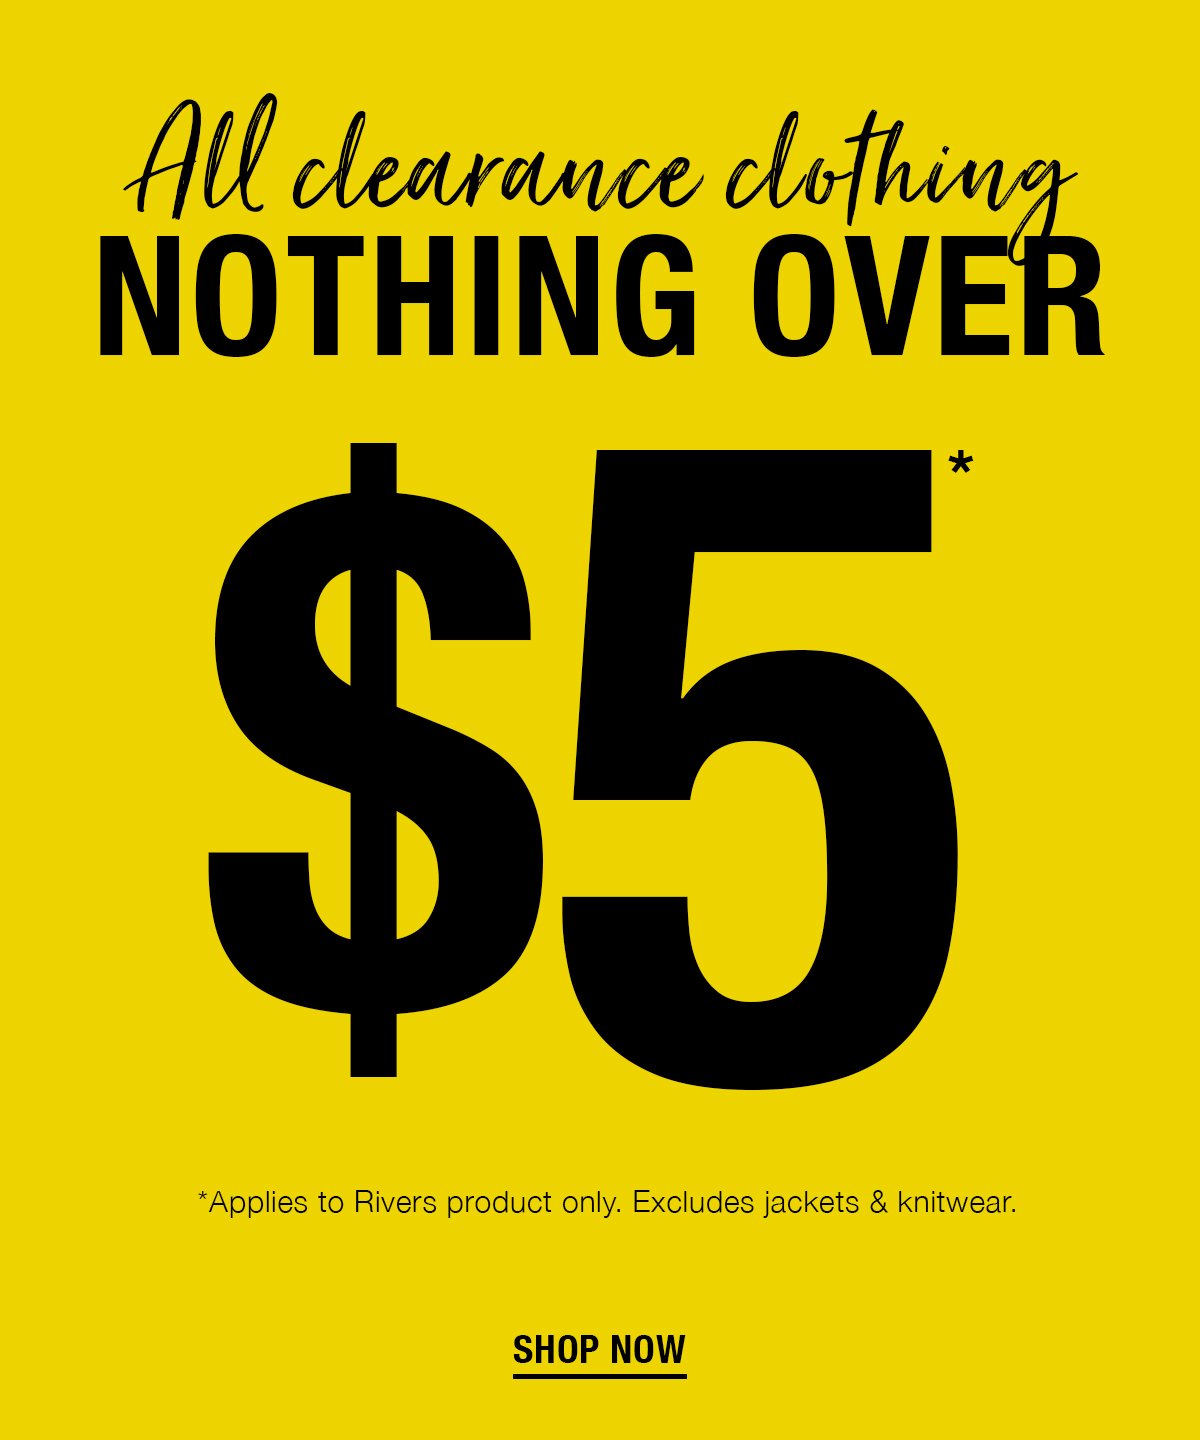 Rivers: Nothing over $5* Clearance Clothing